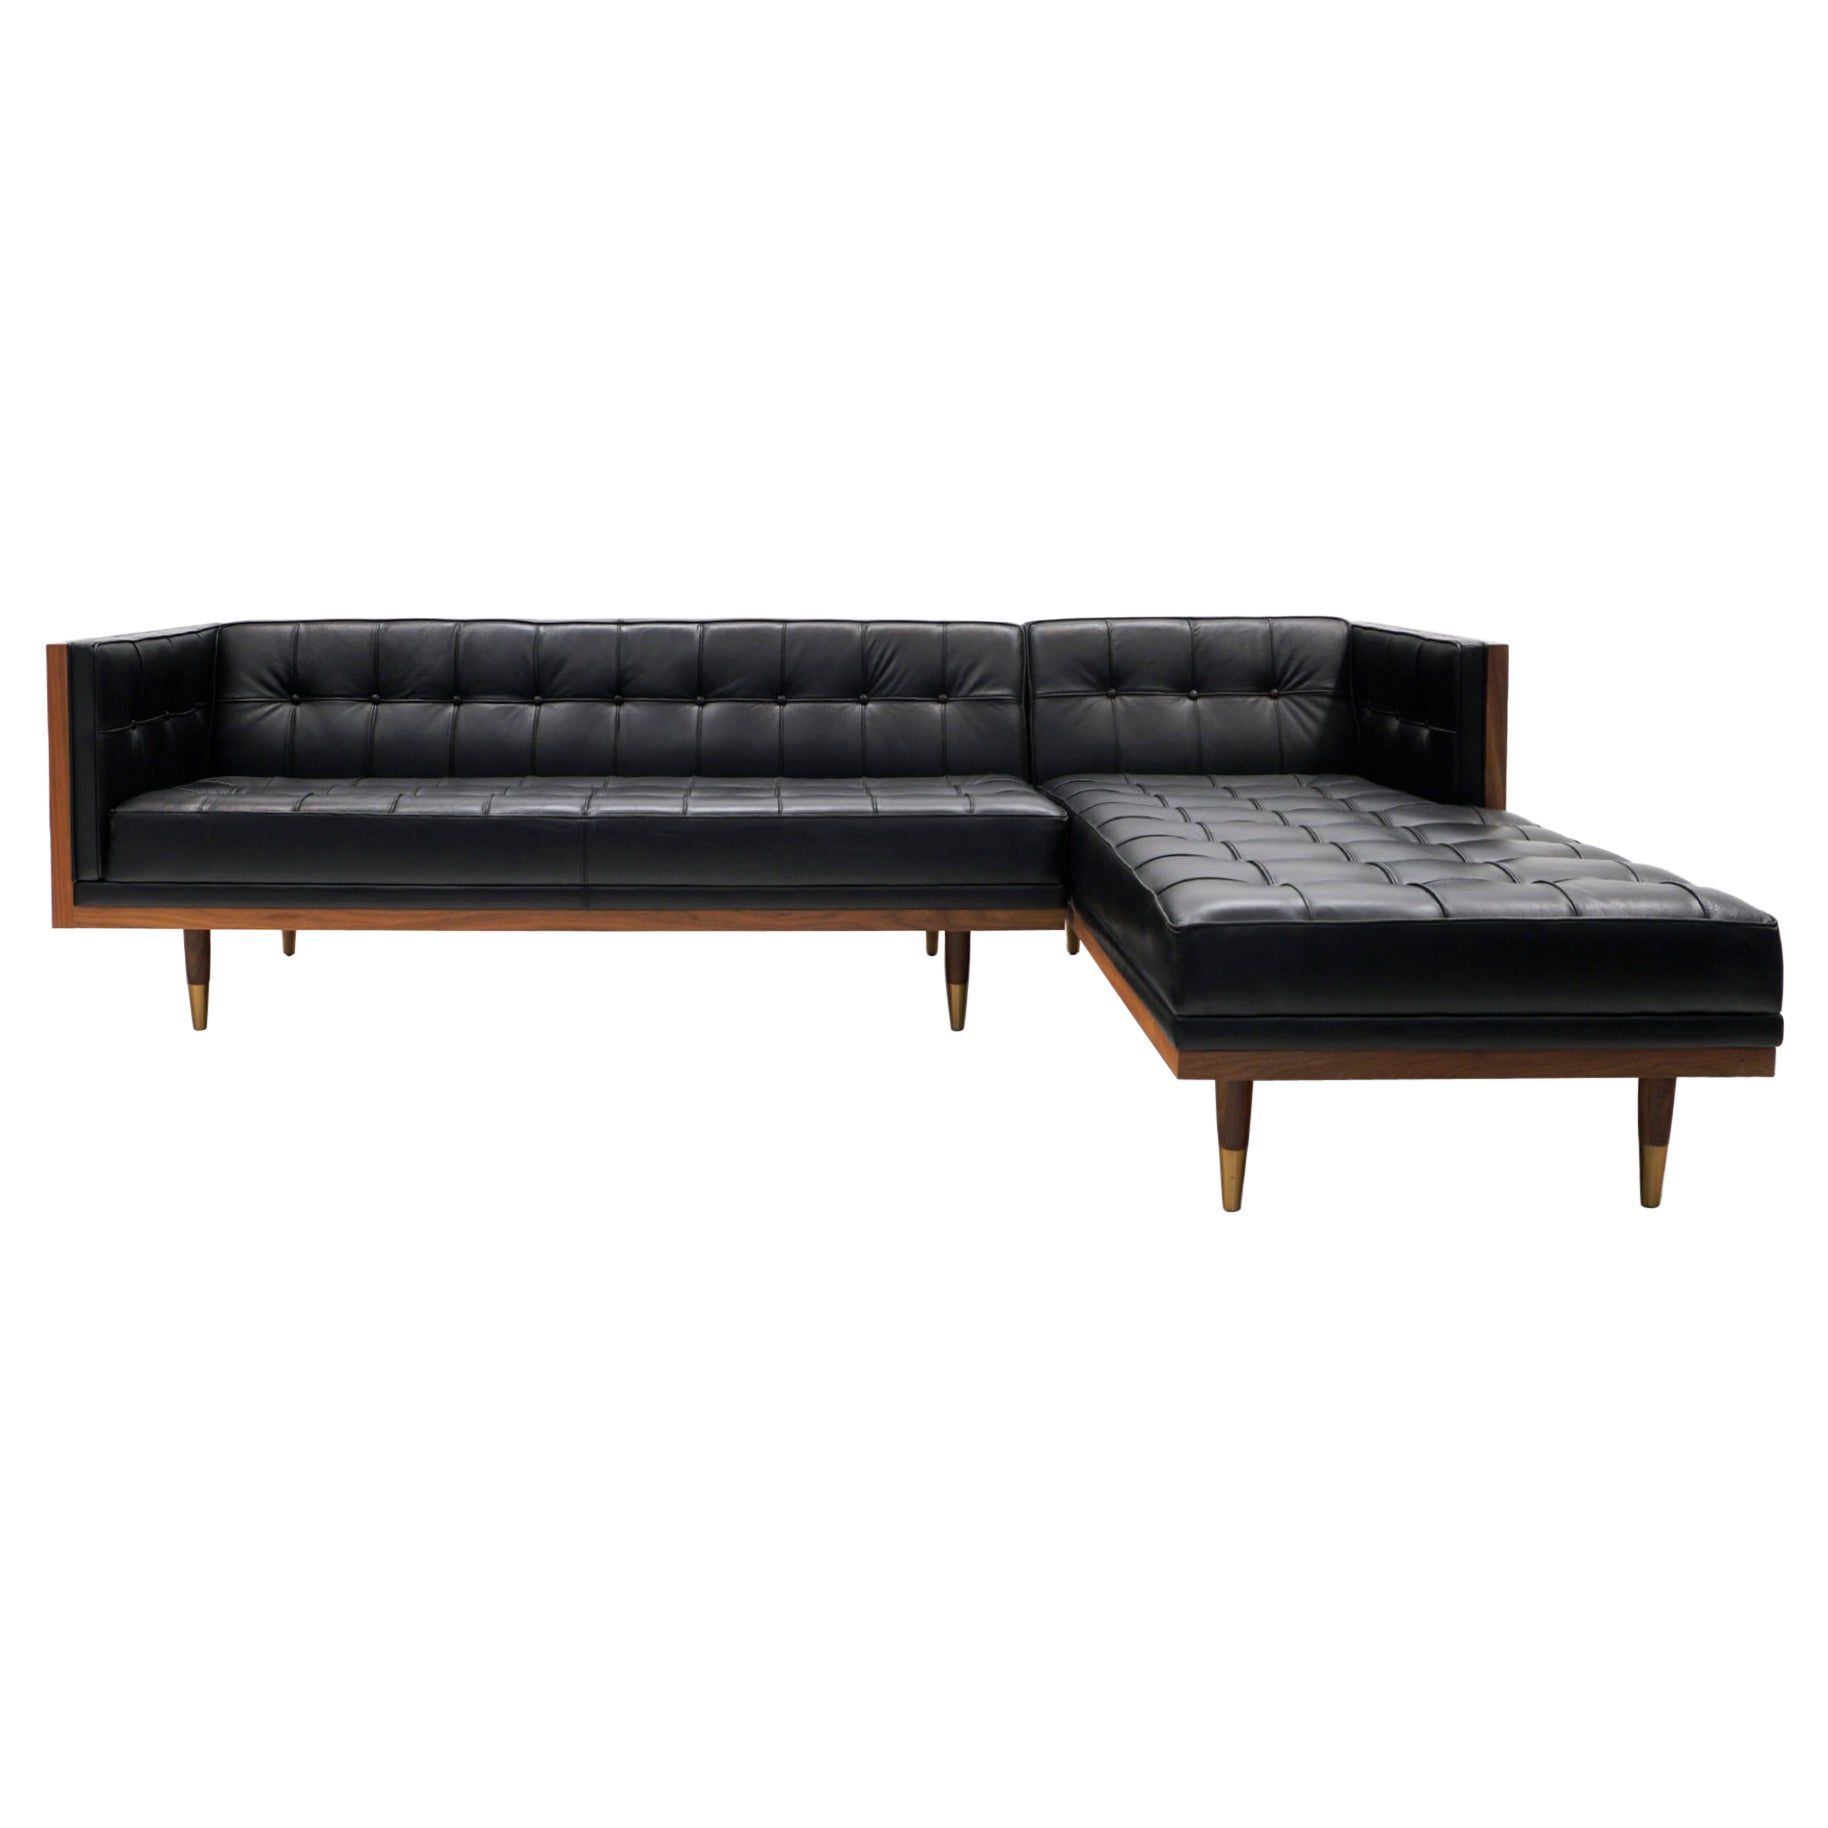 Case Sofa Sectional with Chaise in Black Leather and Walnut by Kardiel